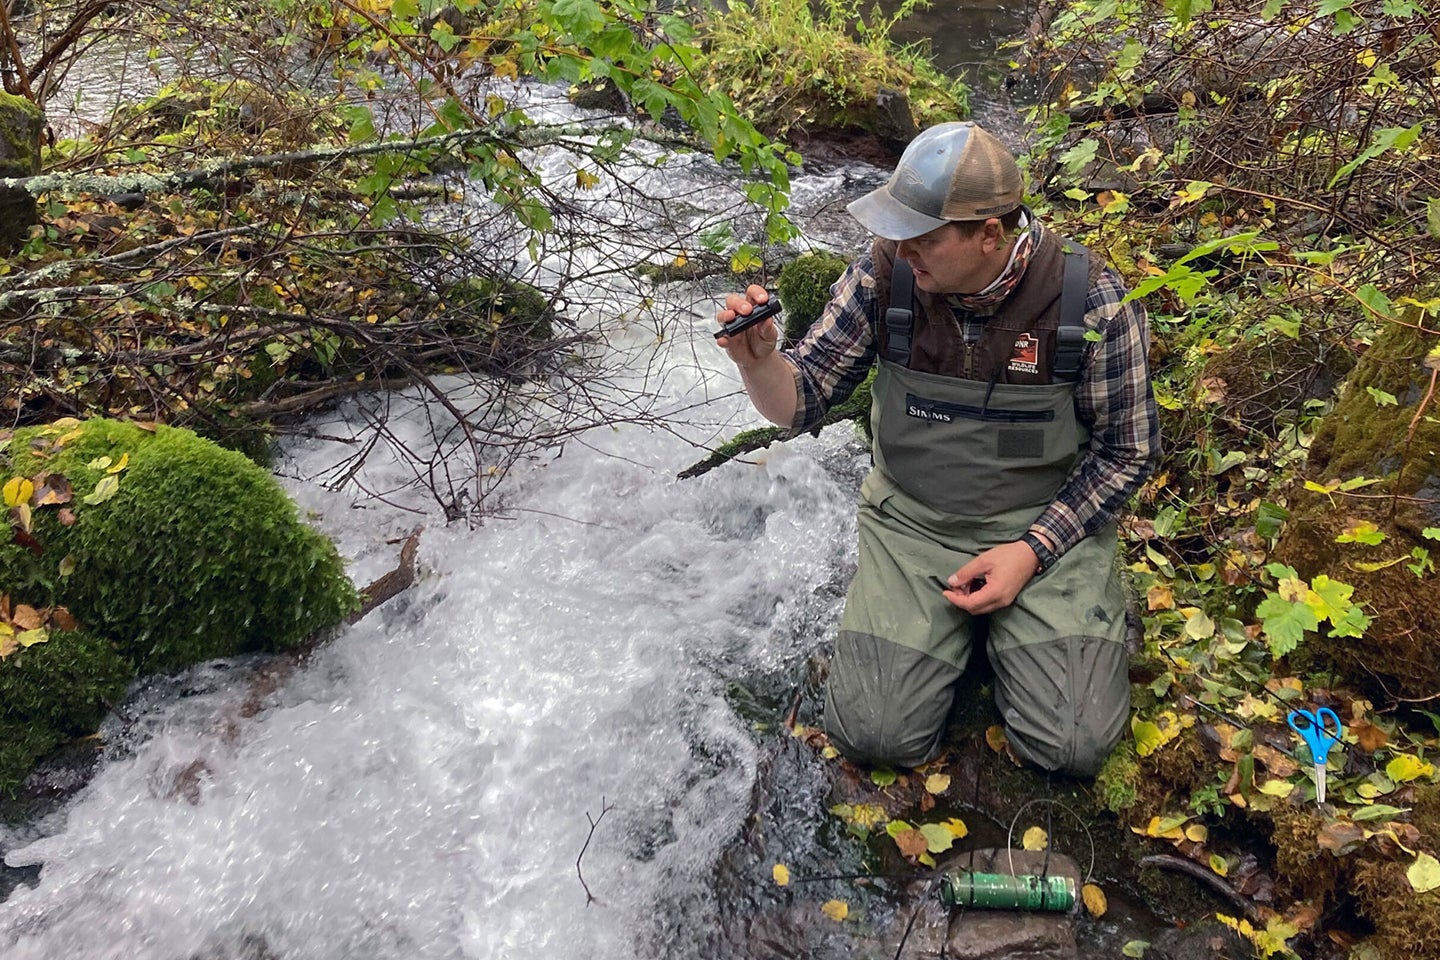 Fisheries biologists monitors water quality in California.